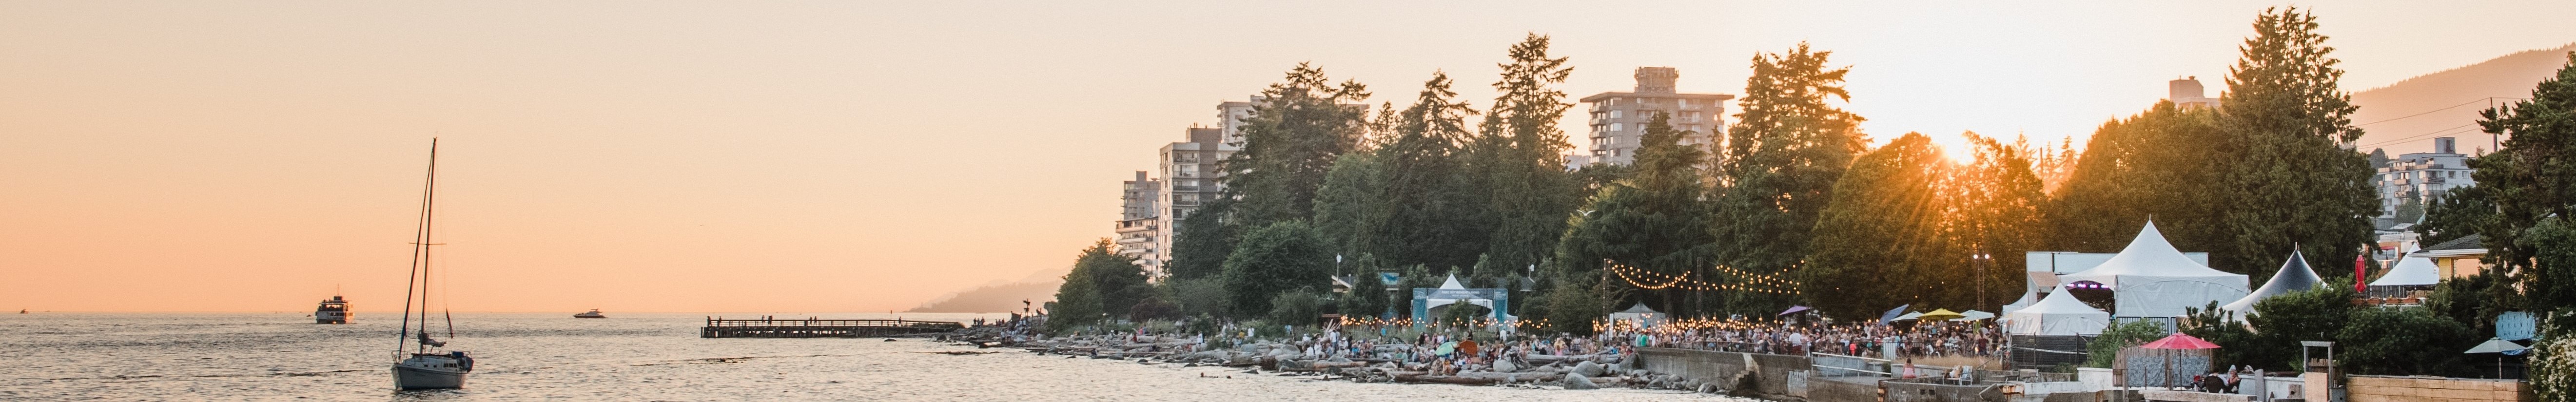 Scenic view of boats, trees, and a sunset over the water at West Vancouver waterfront.